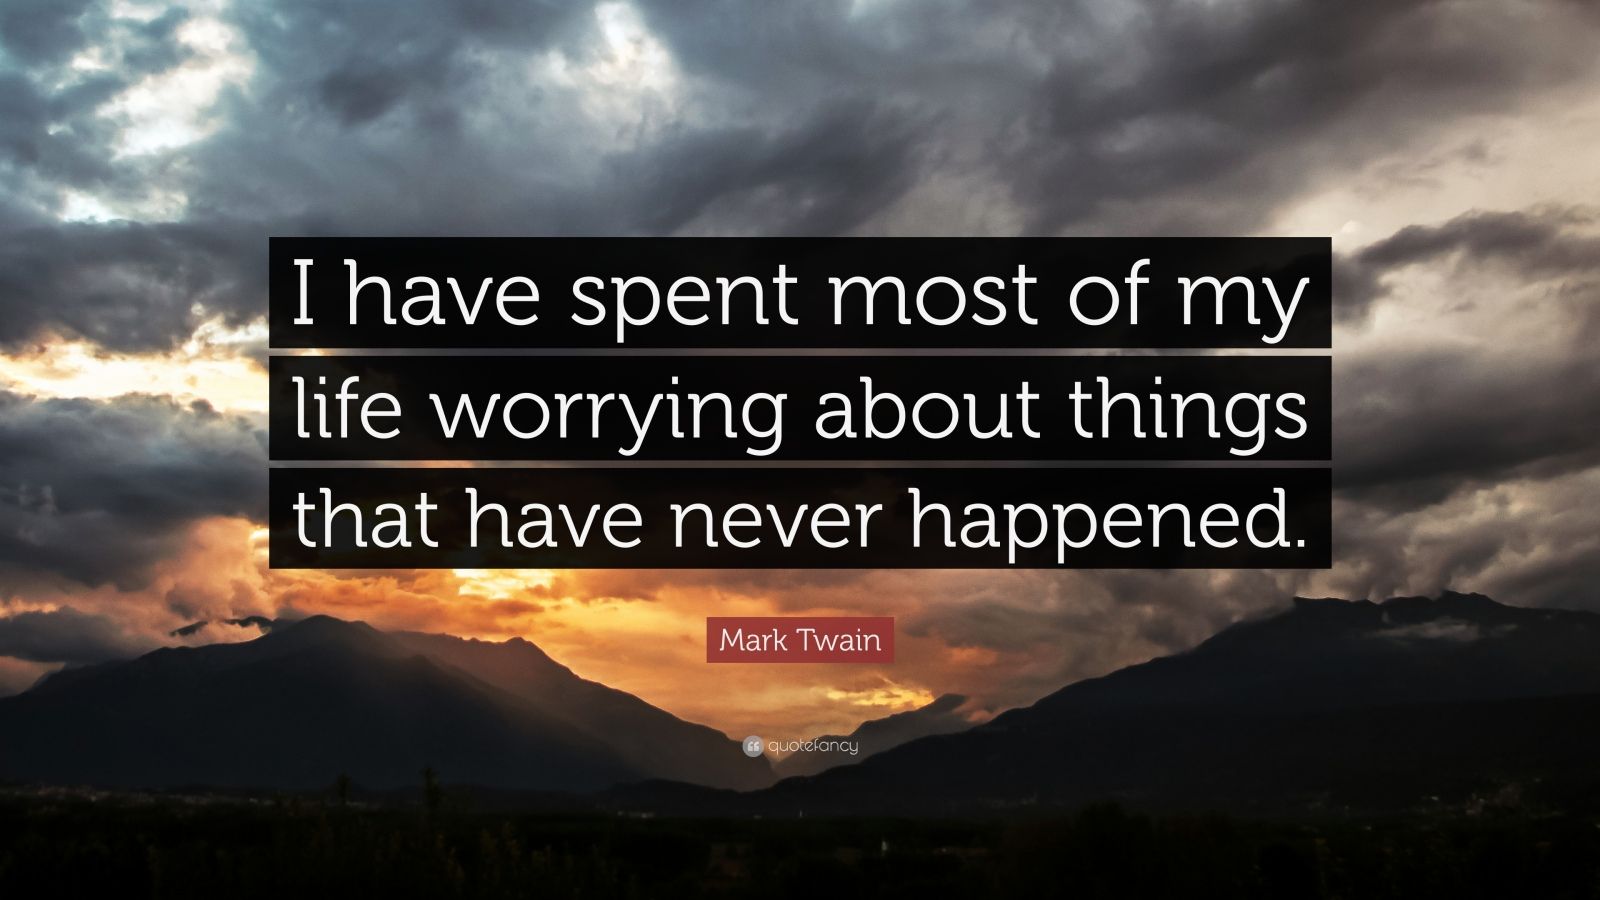 Mark Twain Quote: “I have spent most of my life worrying about things